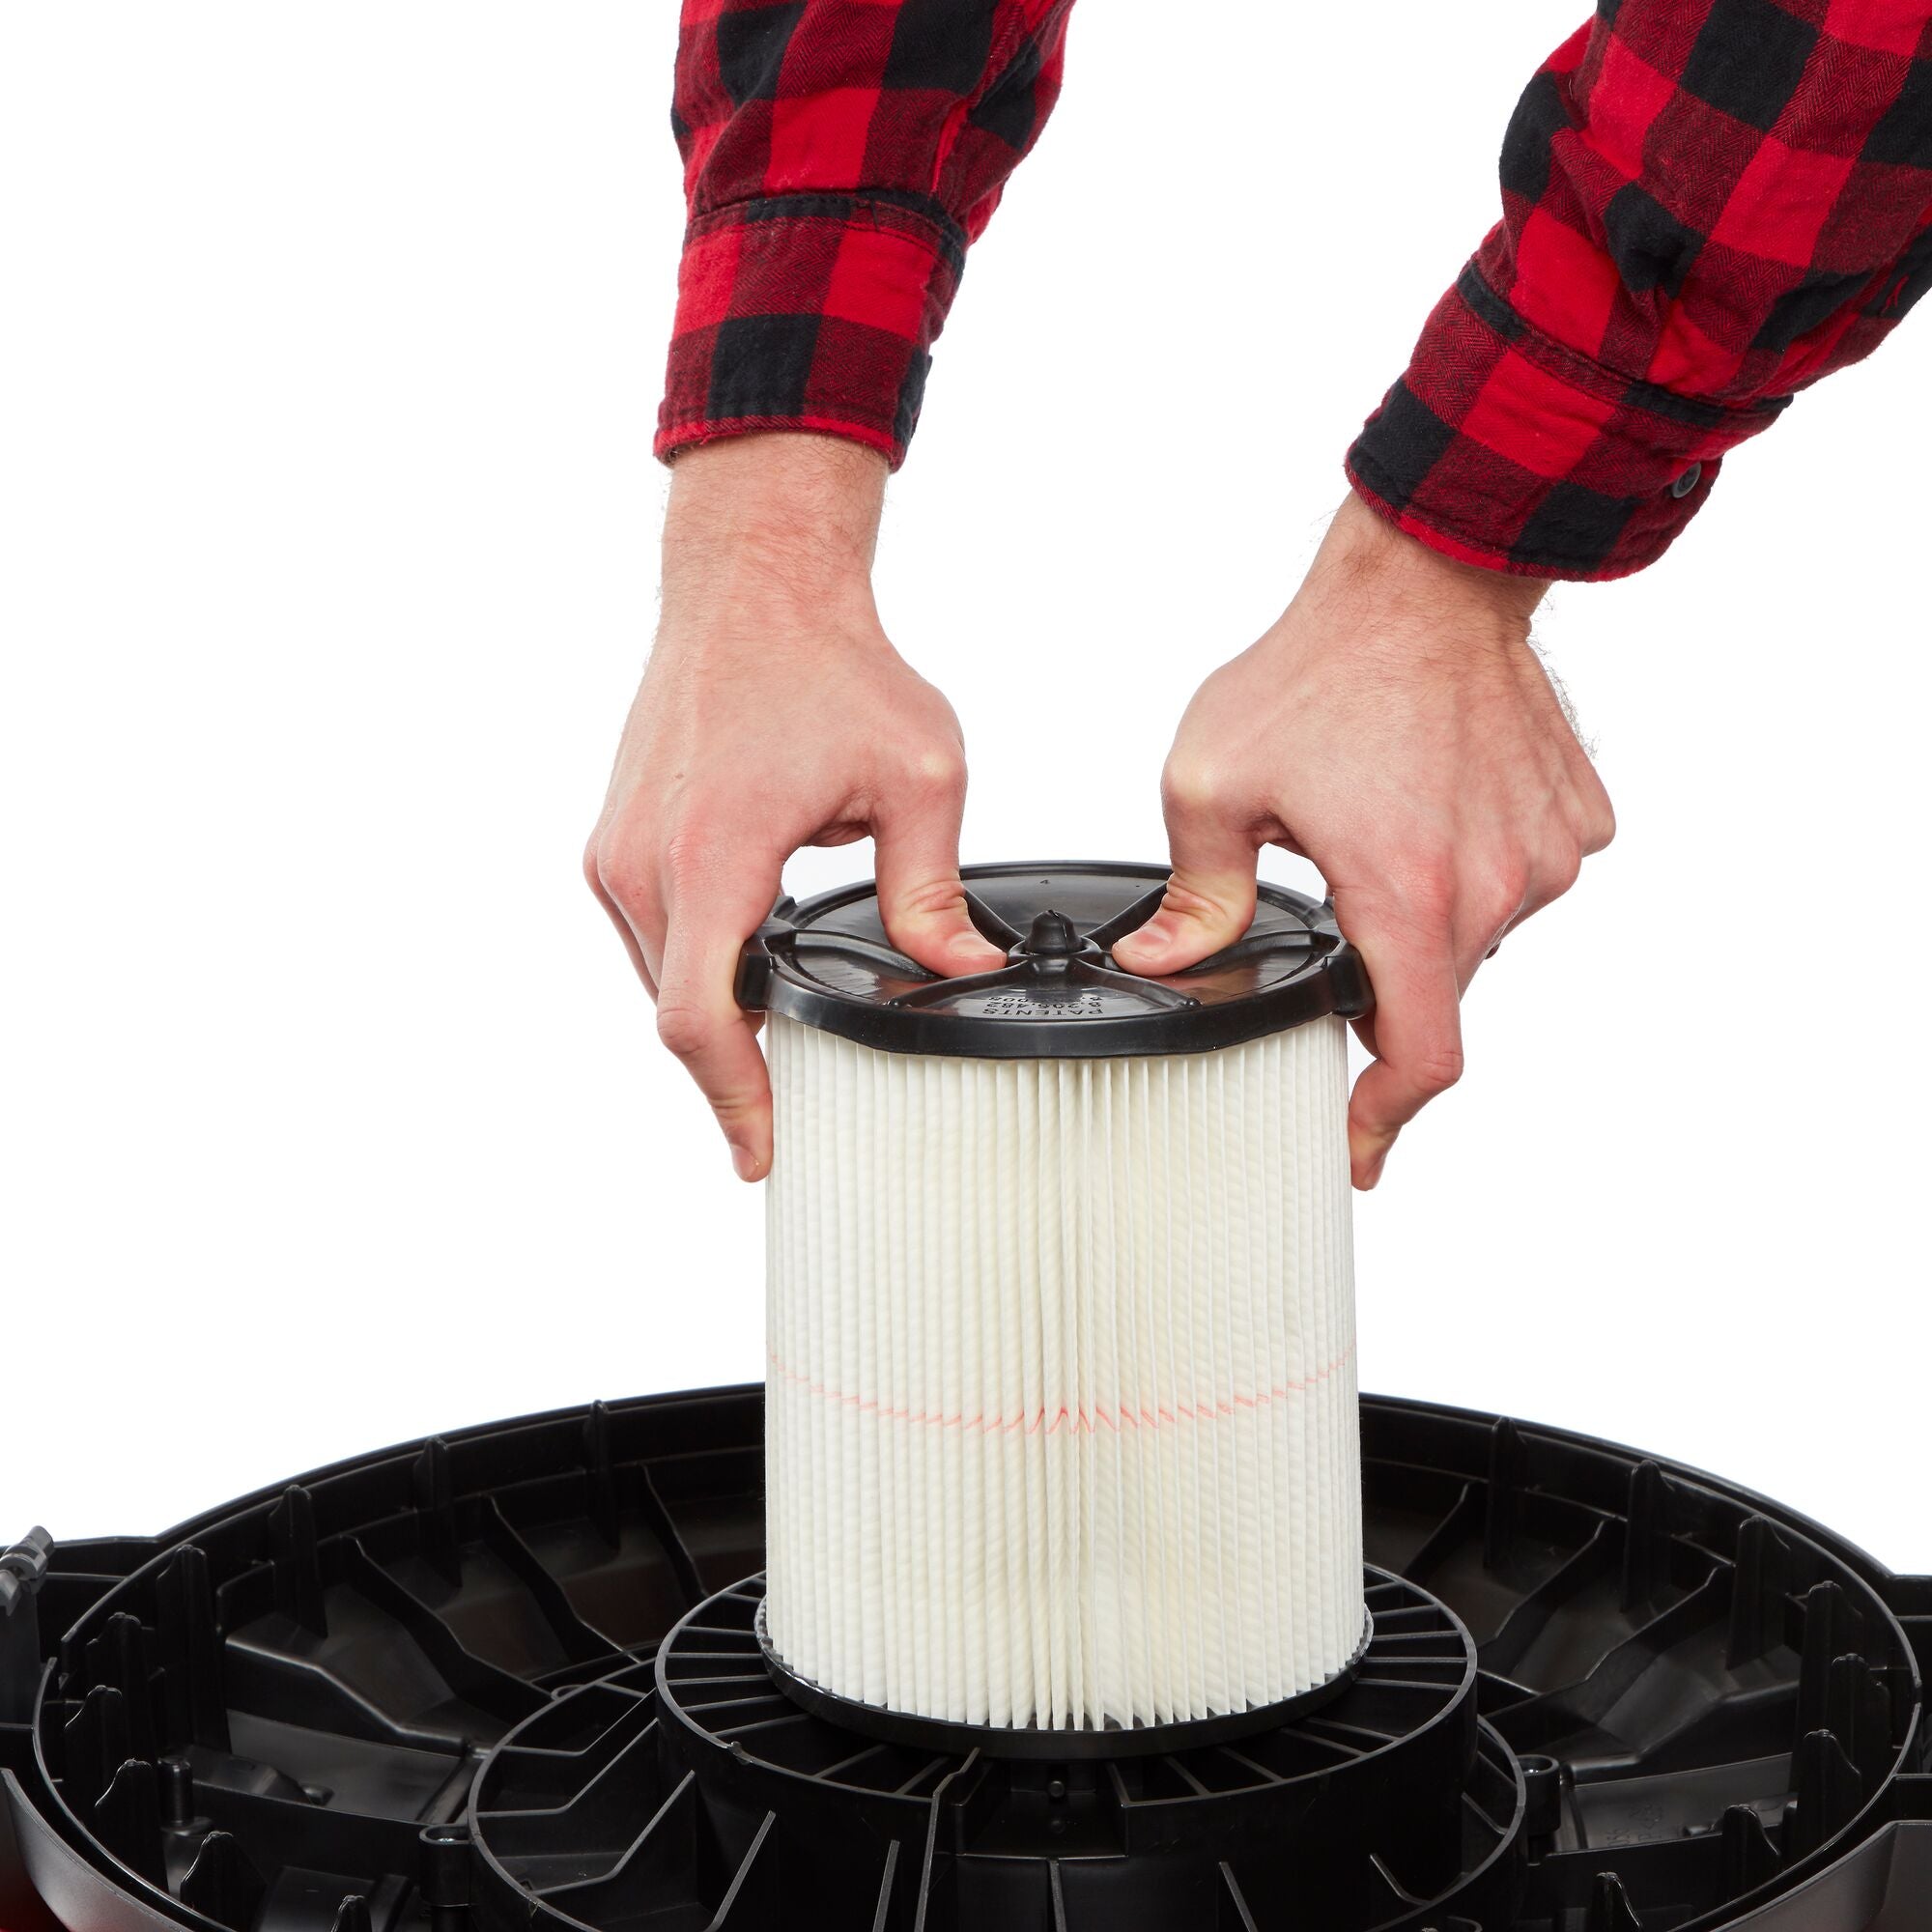 Person installing CRAFTSMAN General Dirt Replacement Filter onto wet/dry shop vac powerhead